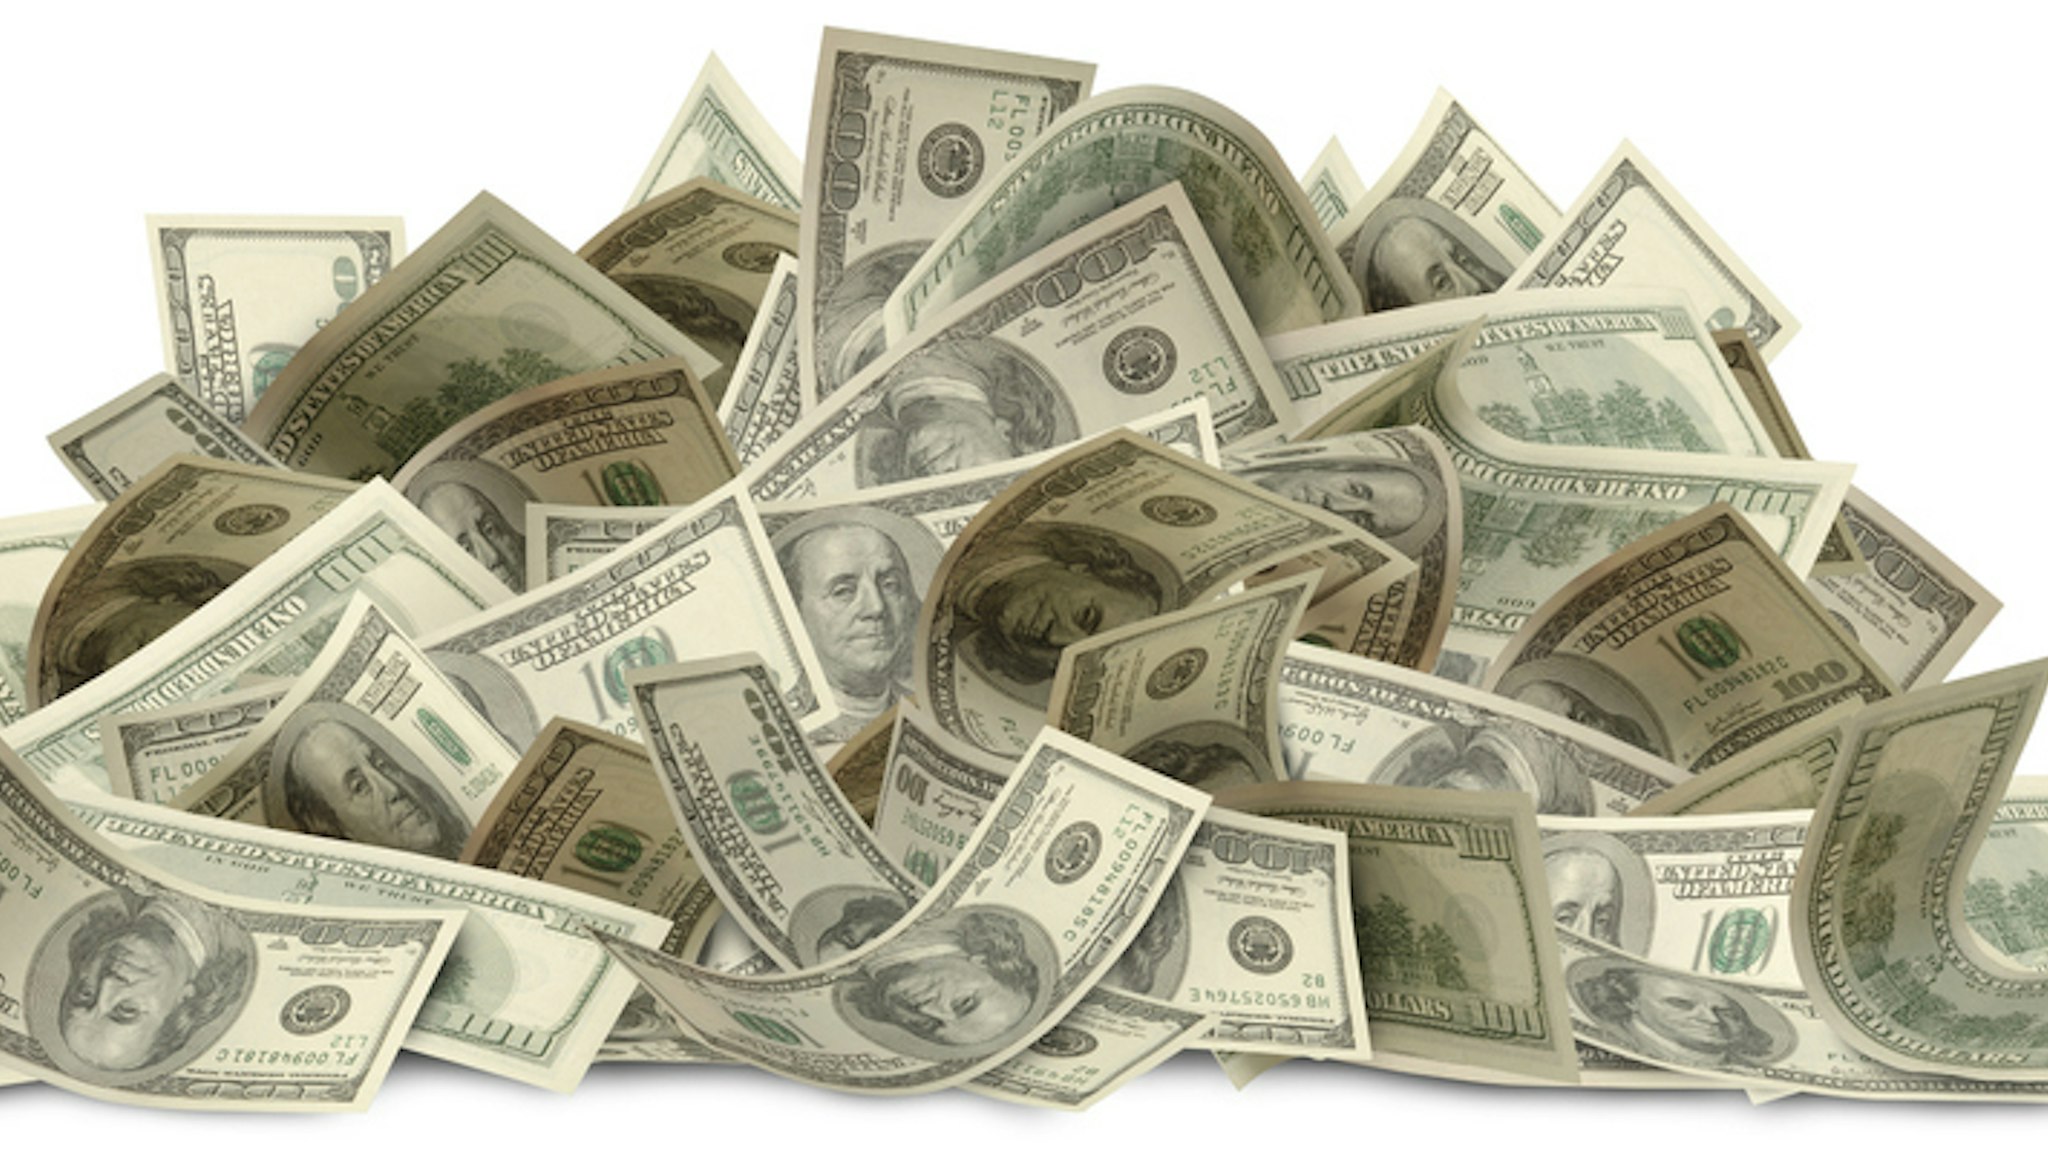 Large Pile of One Hundred Dollar Bills isolated on a white background. Clipping path included. Second of three part series.